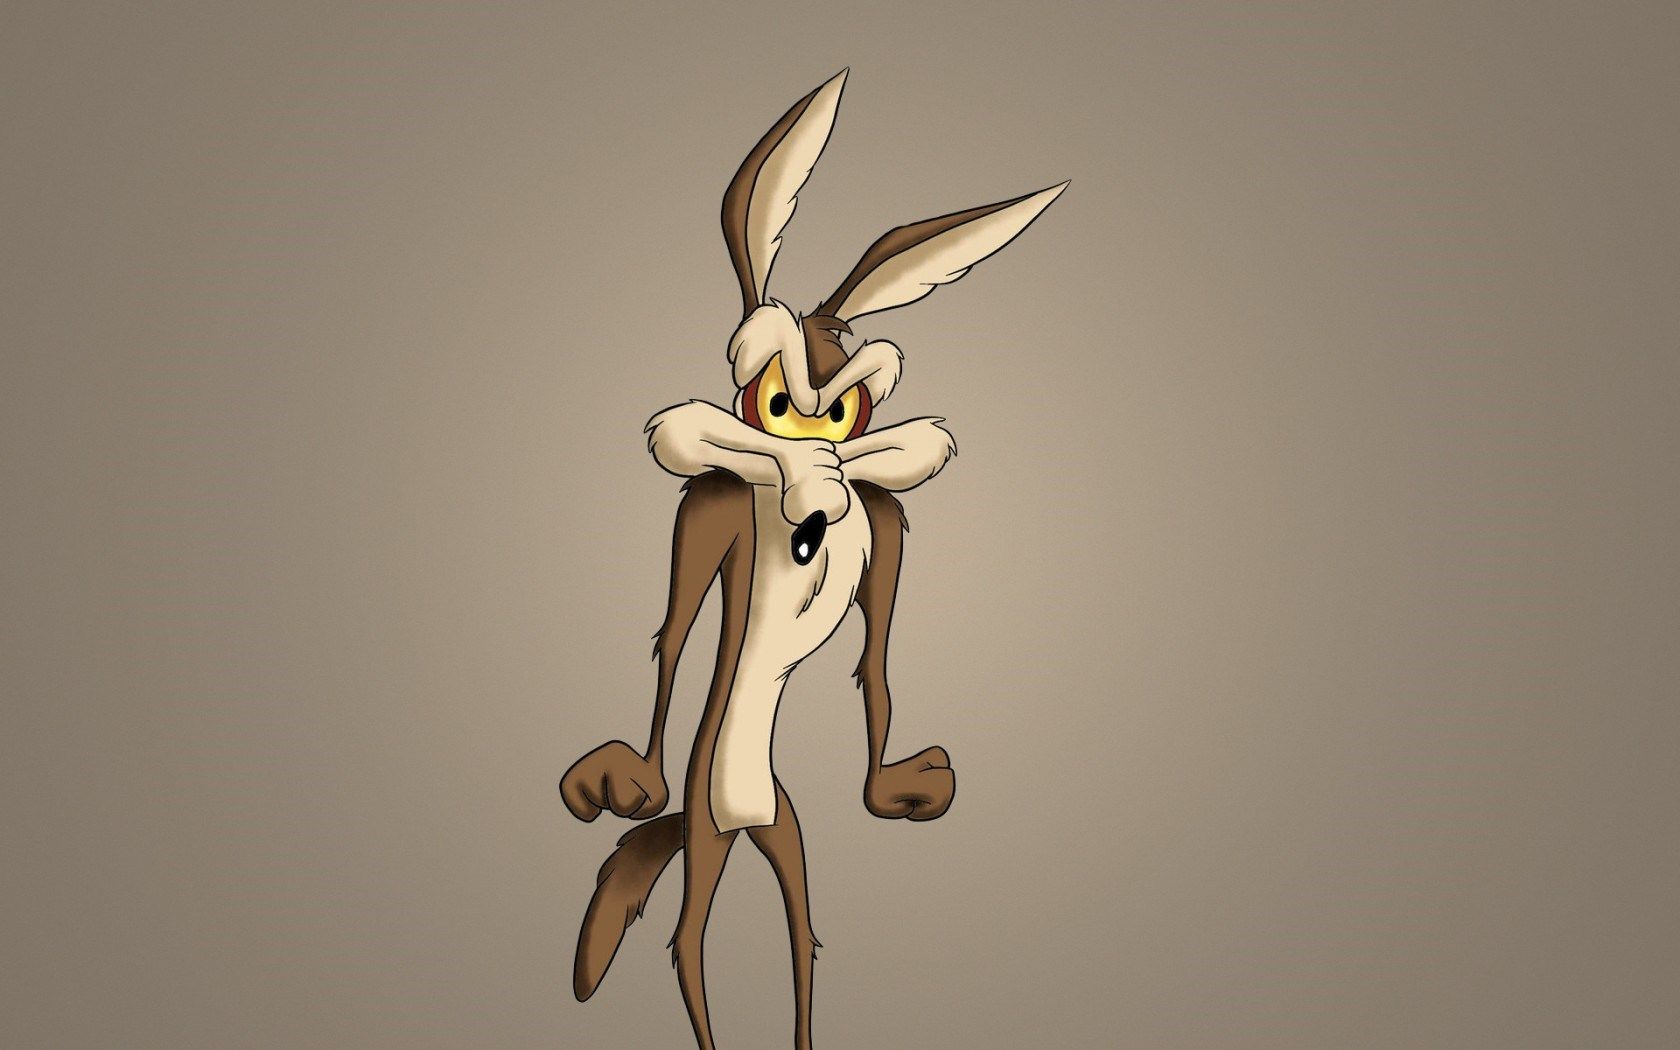 wile-e-coyote-wallpapers-26328-440056.jpg